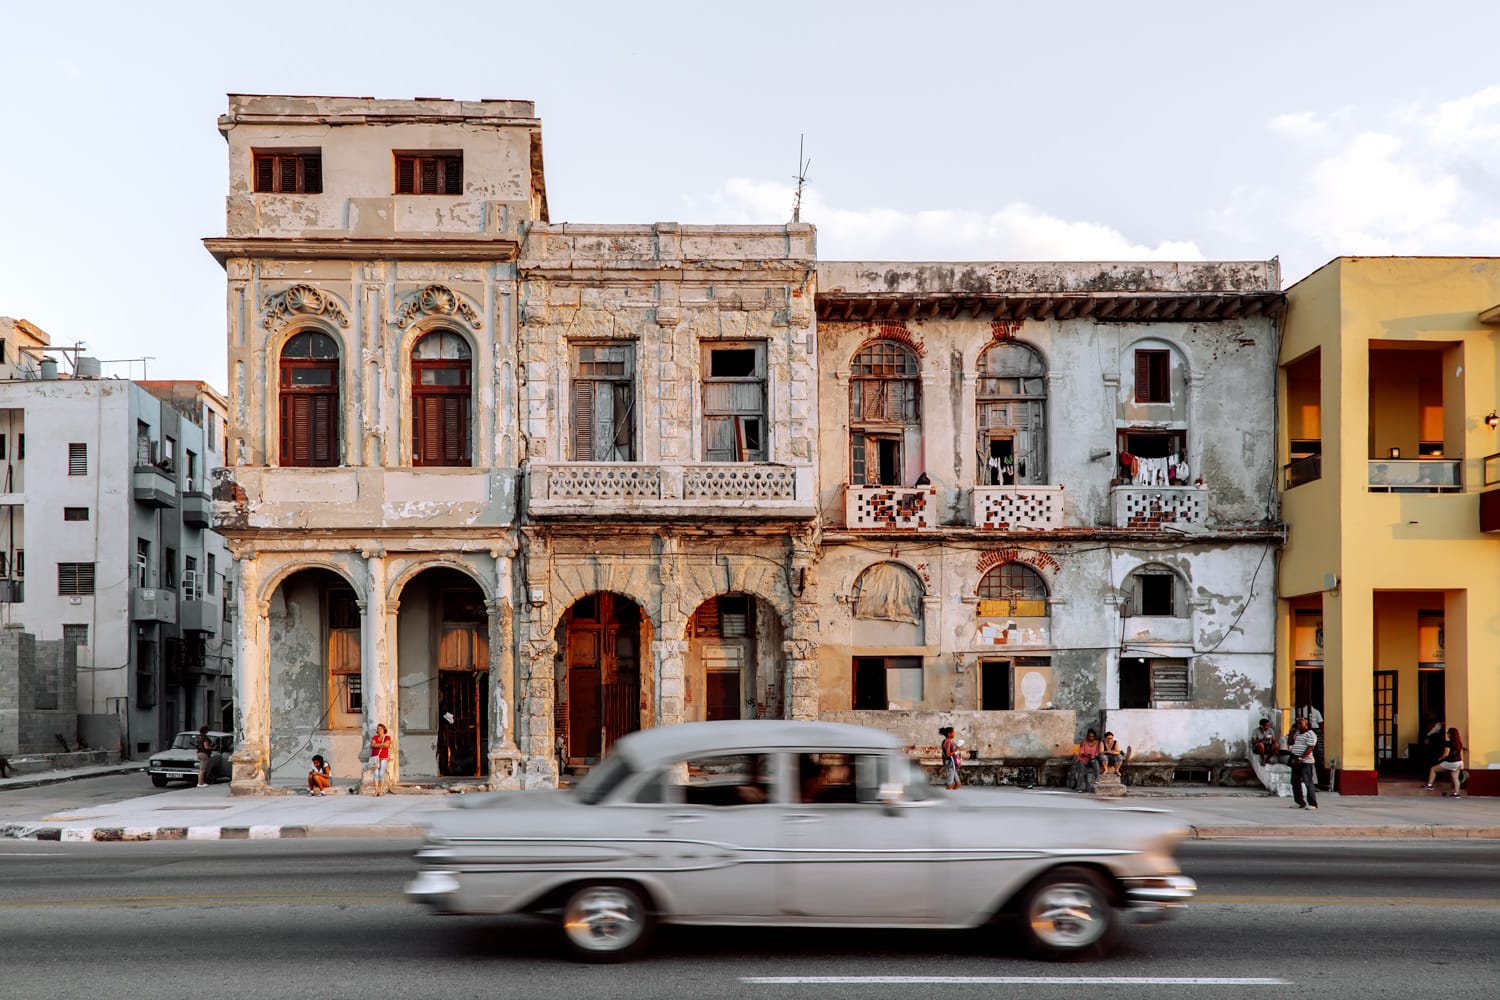 Cuba today: Private dreams and public reality